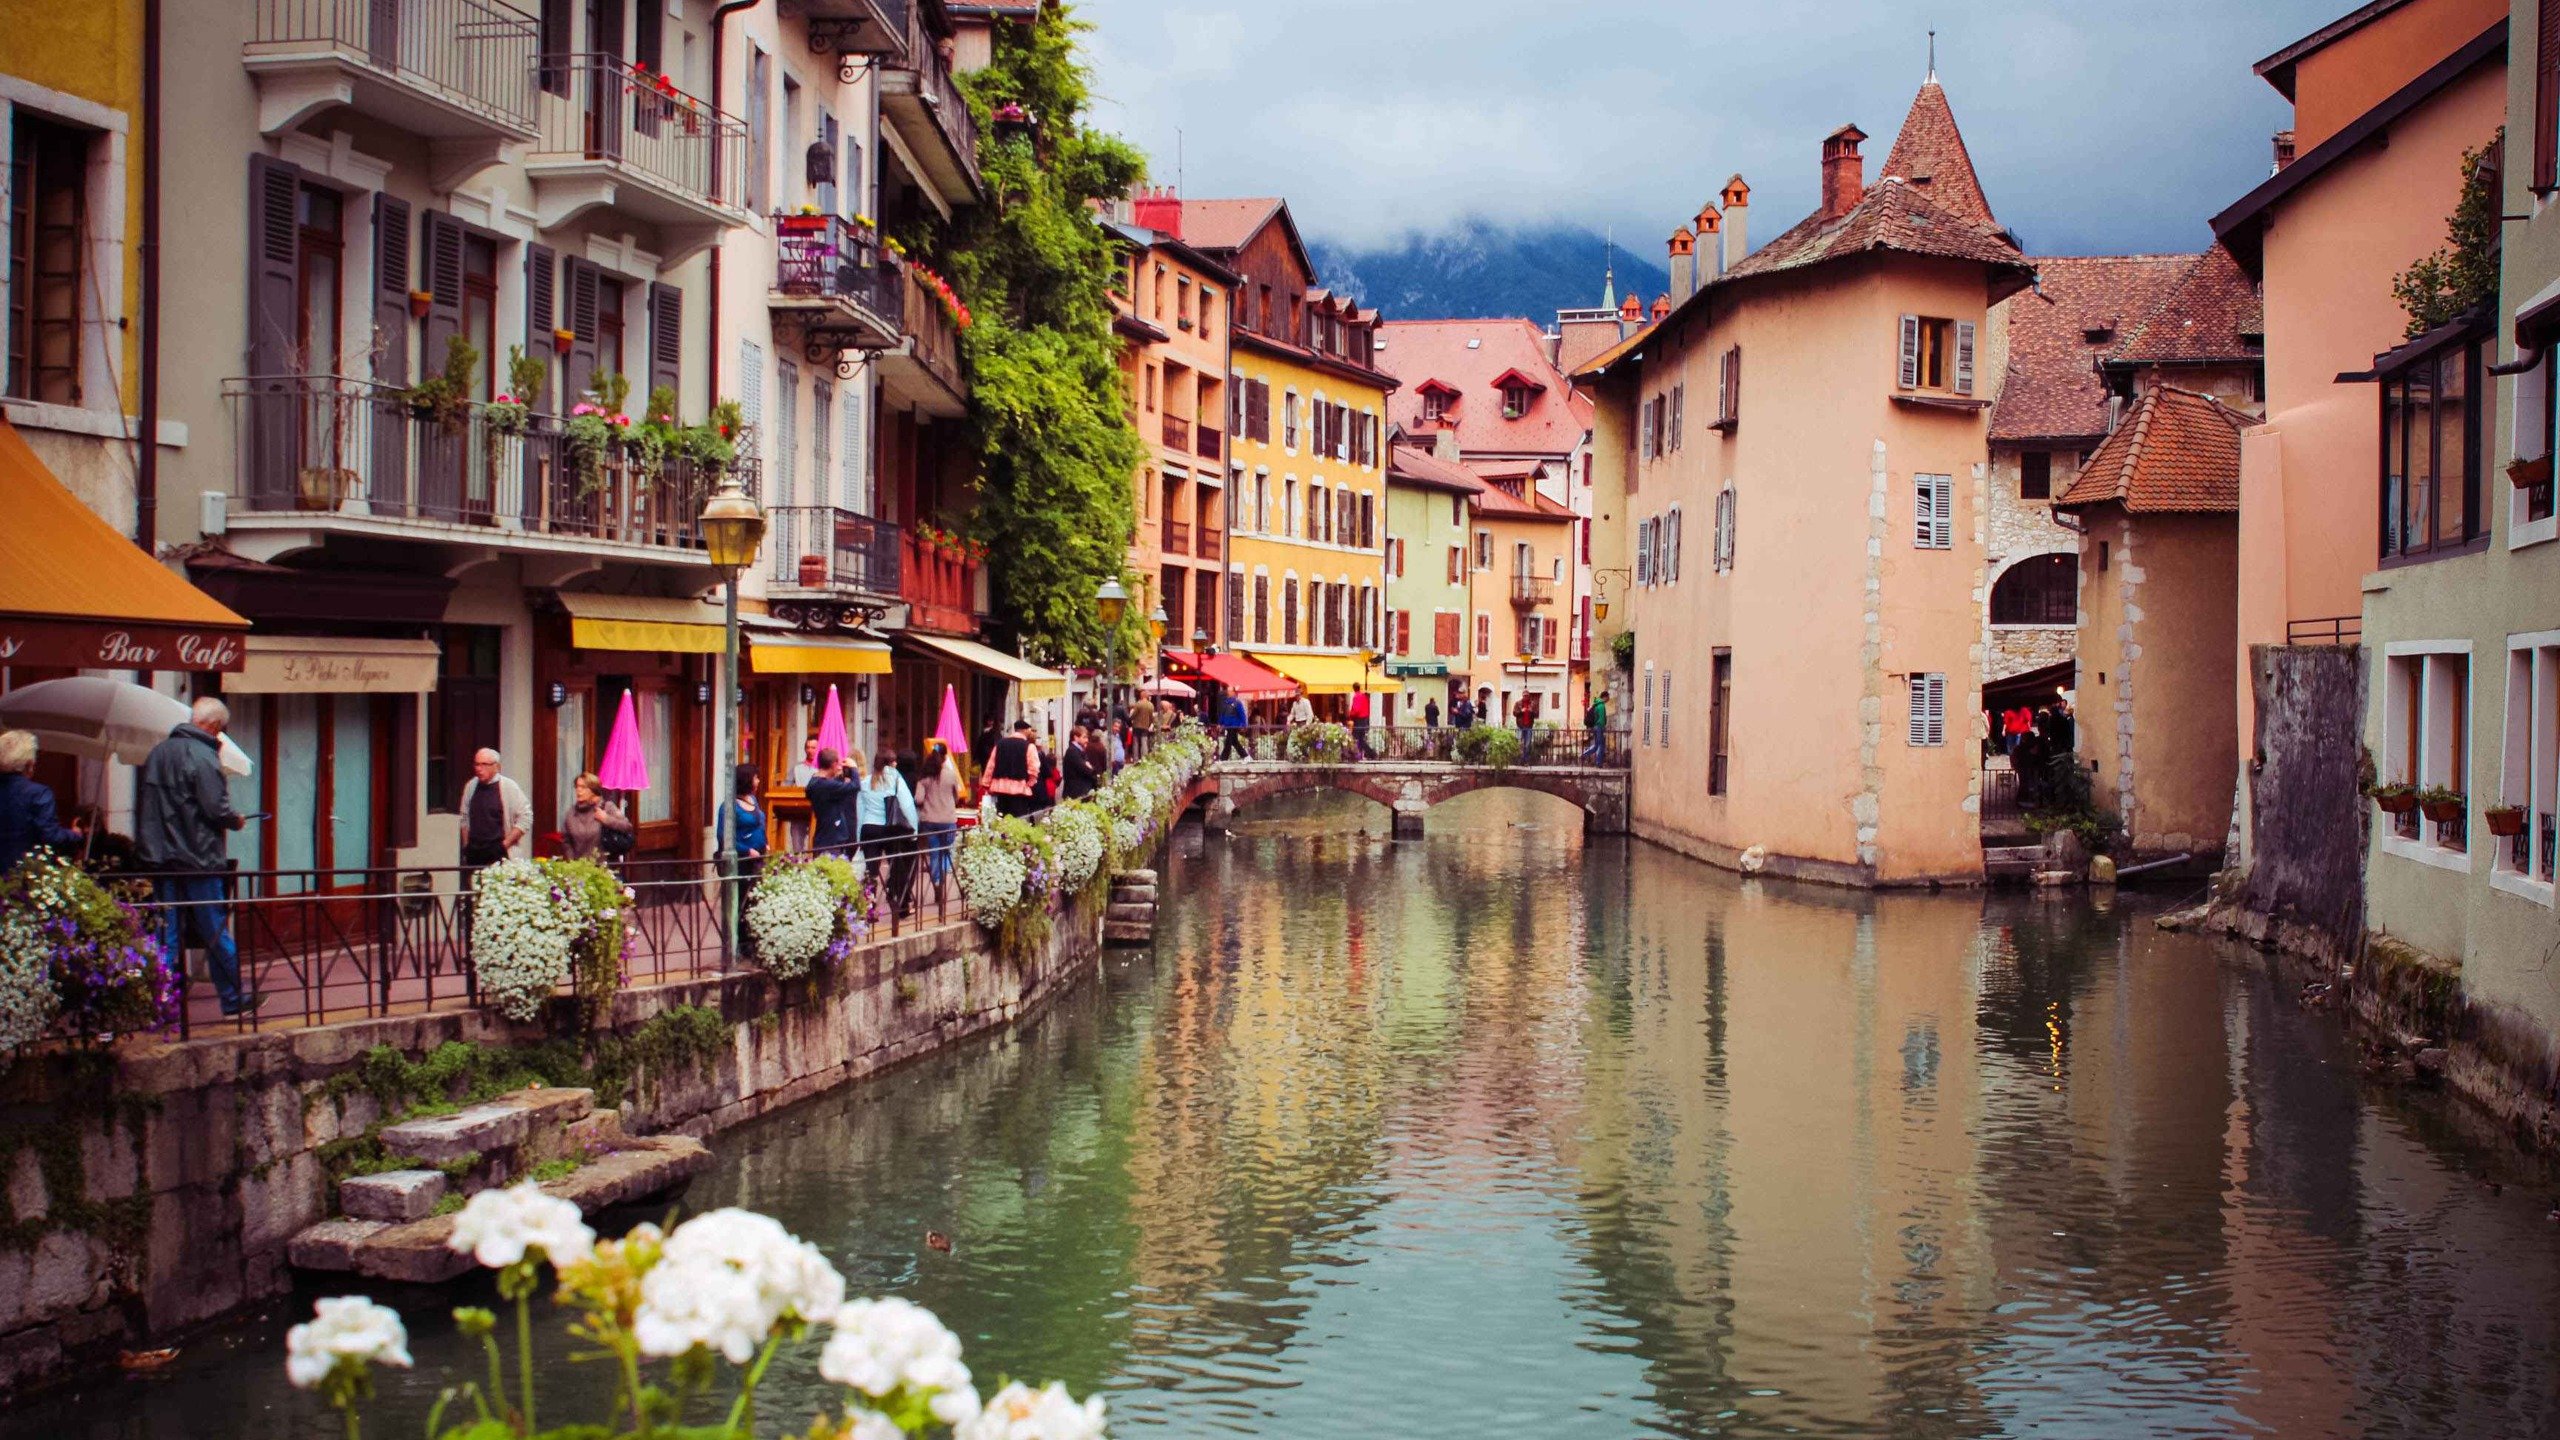 Annecy 4K wallpaper for your desktop or mobile screen free and easy to download